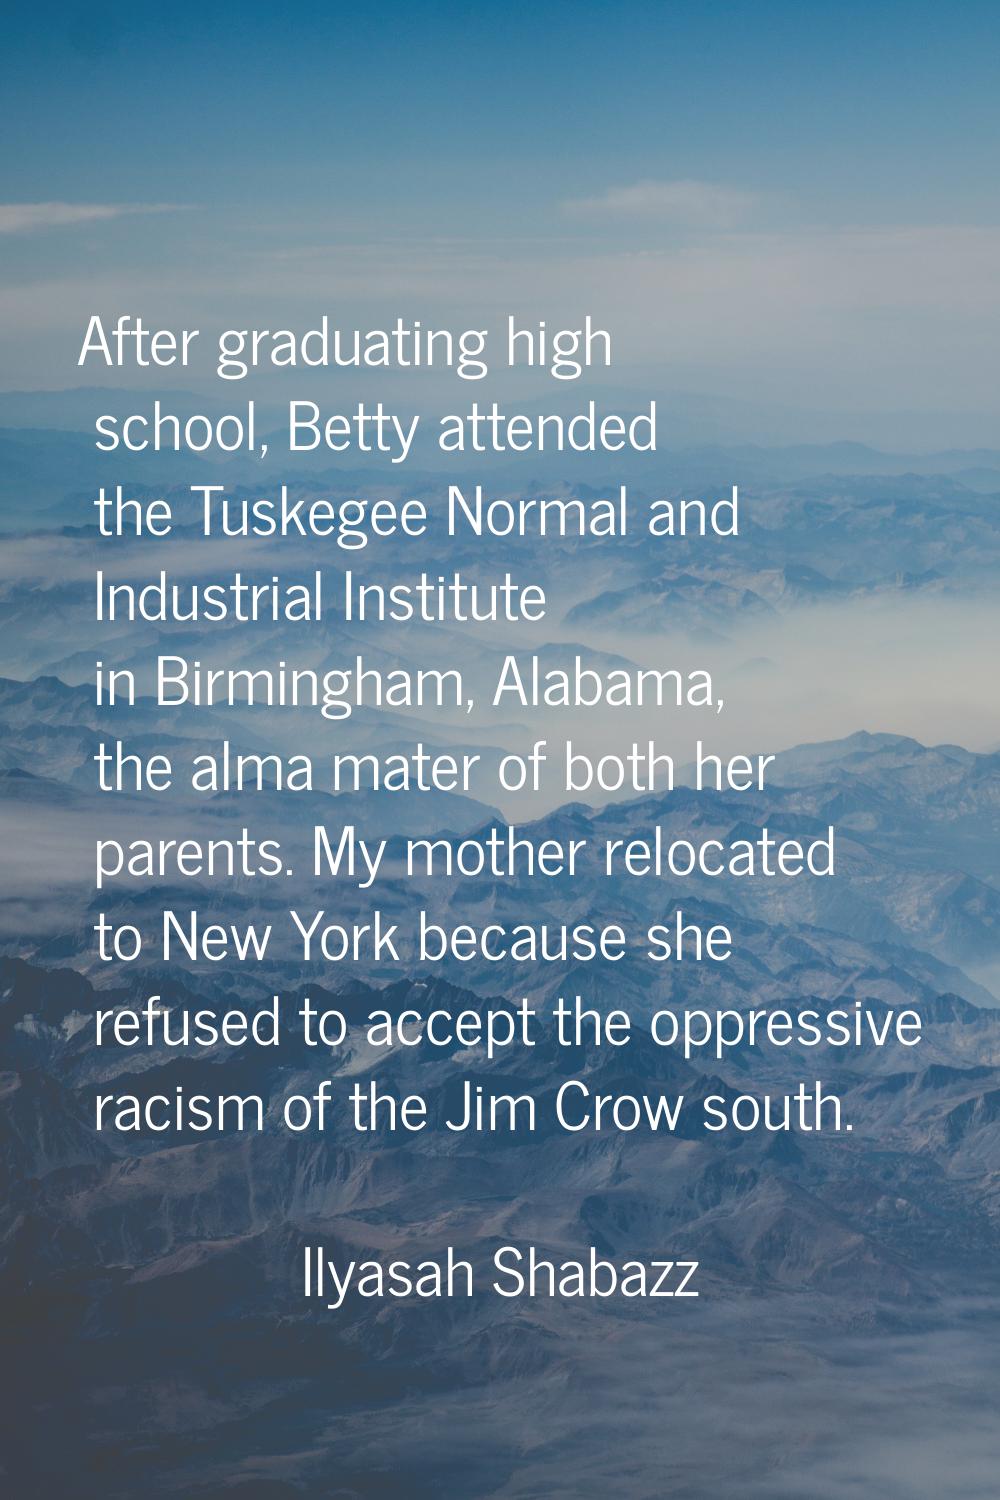 After graduating high school, Betty attended the Tuskegee Normal and Industrial Institute in Birmin